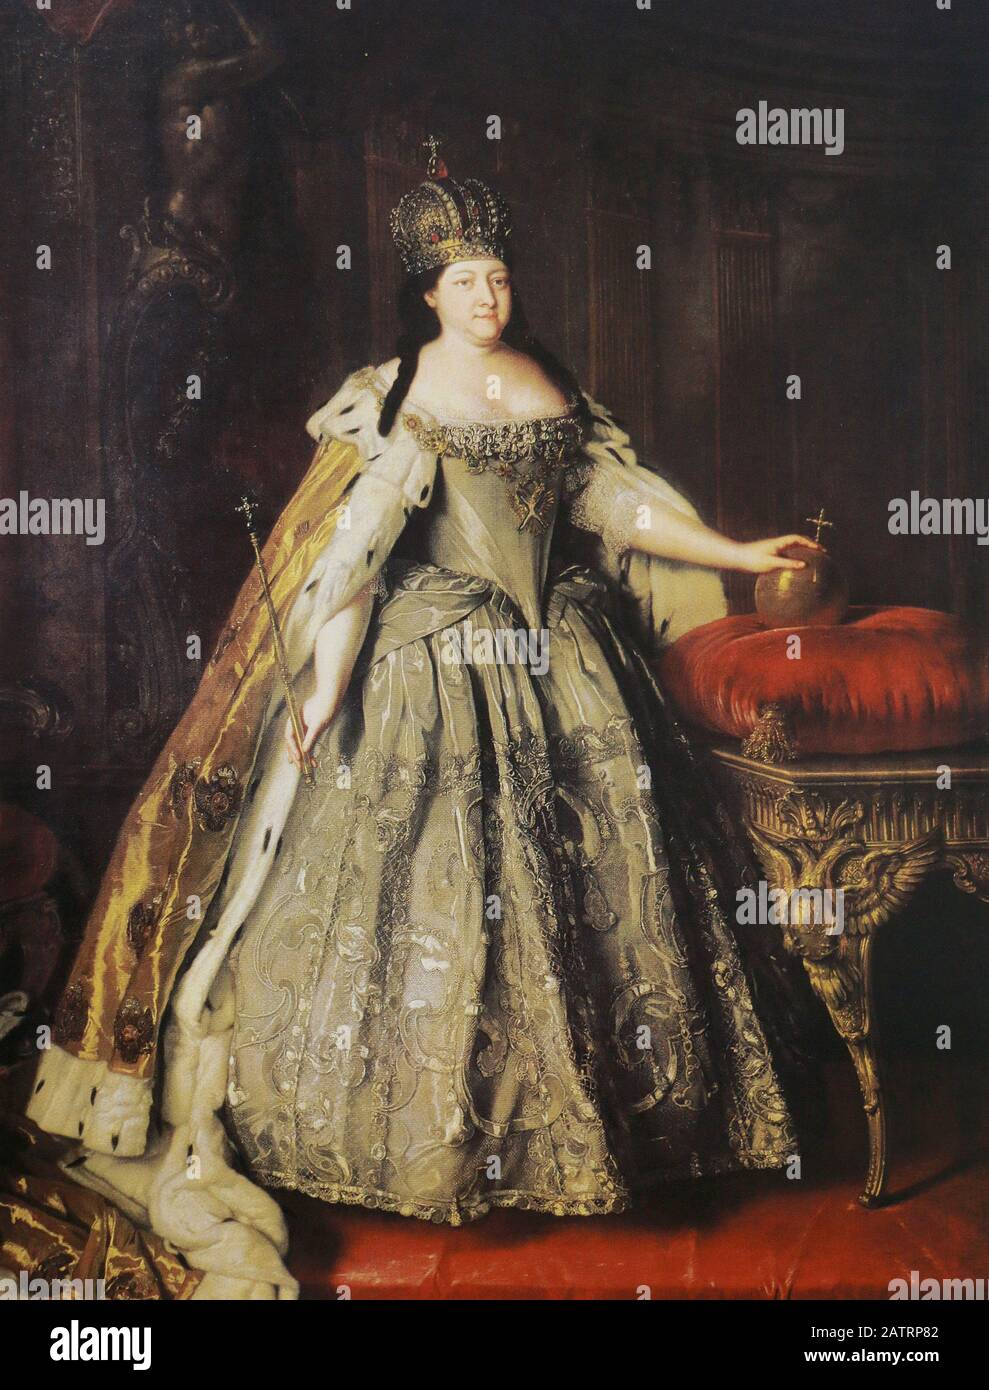 Russian Empress Anna Ioannovna. Painting by L. Caravaque, 18th century. Stock Photo